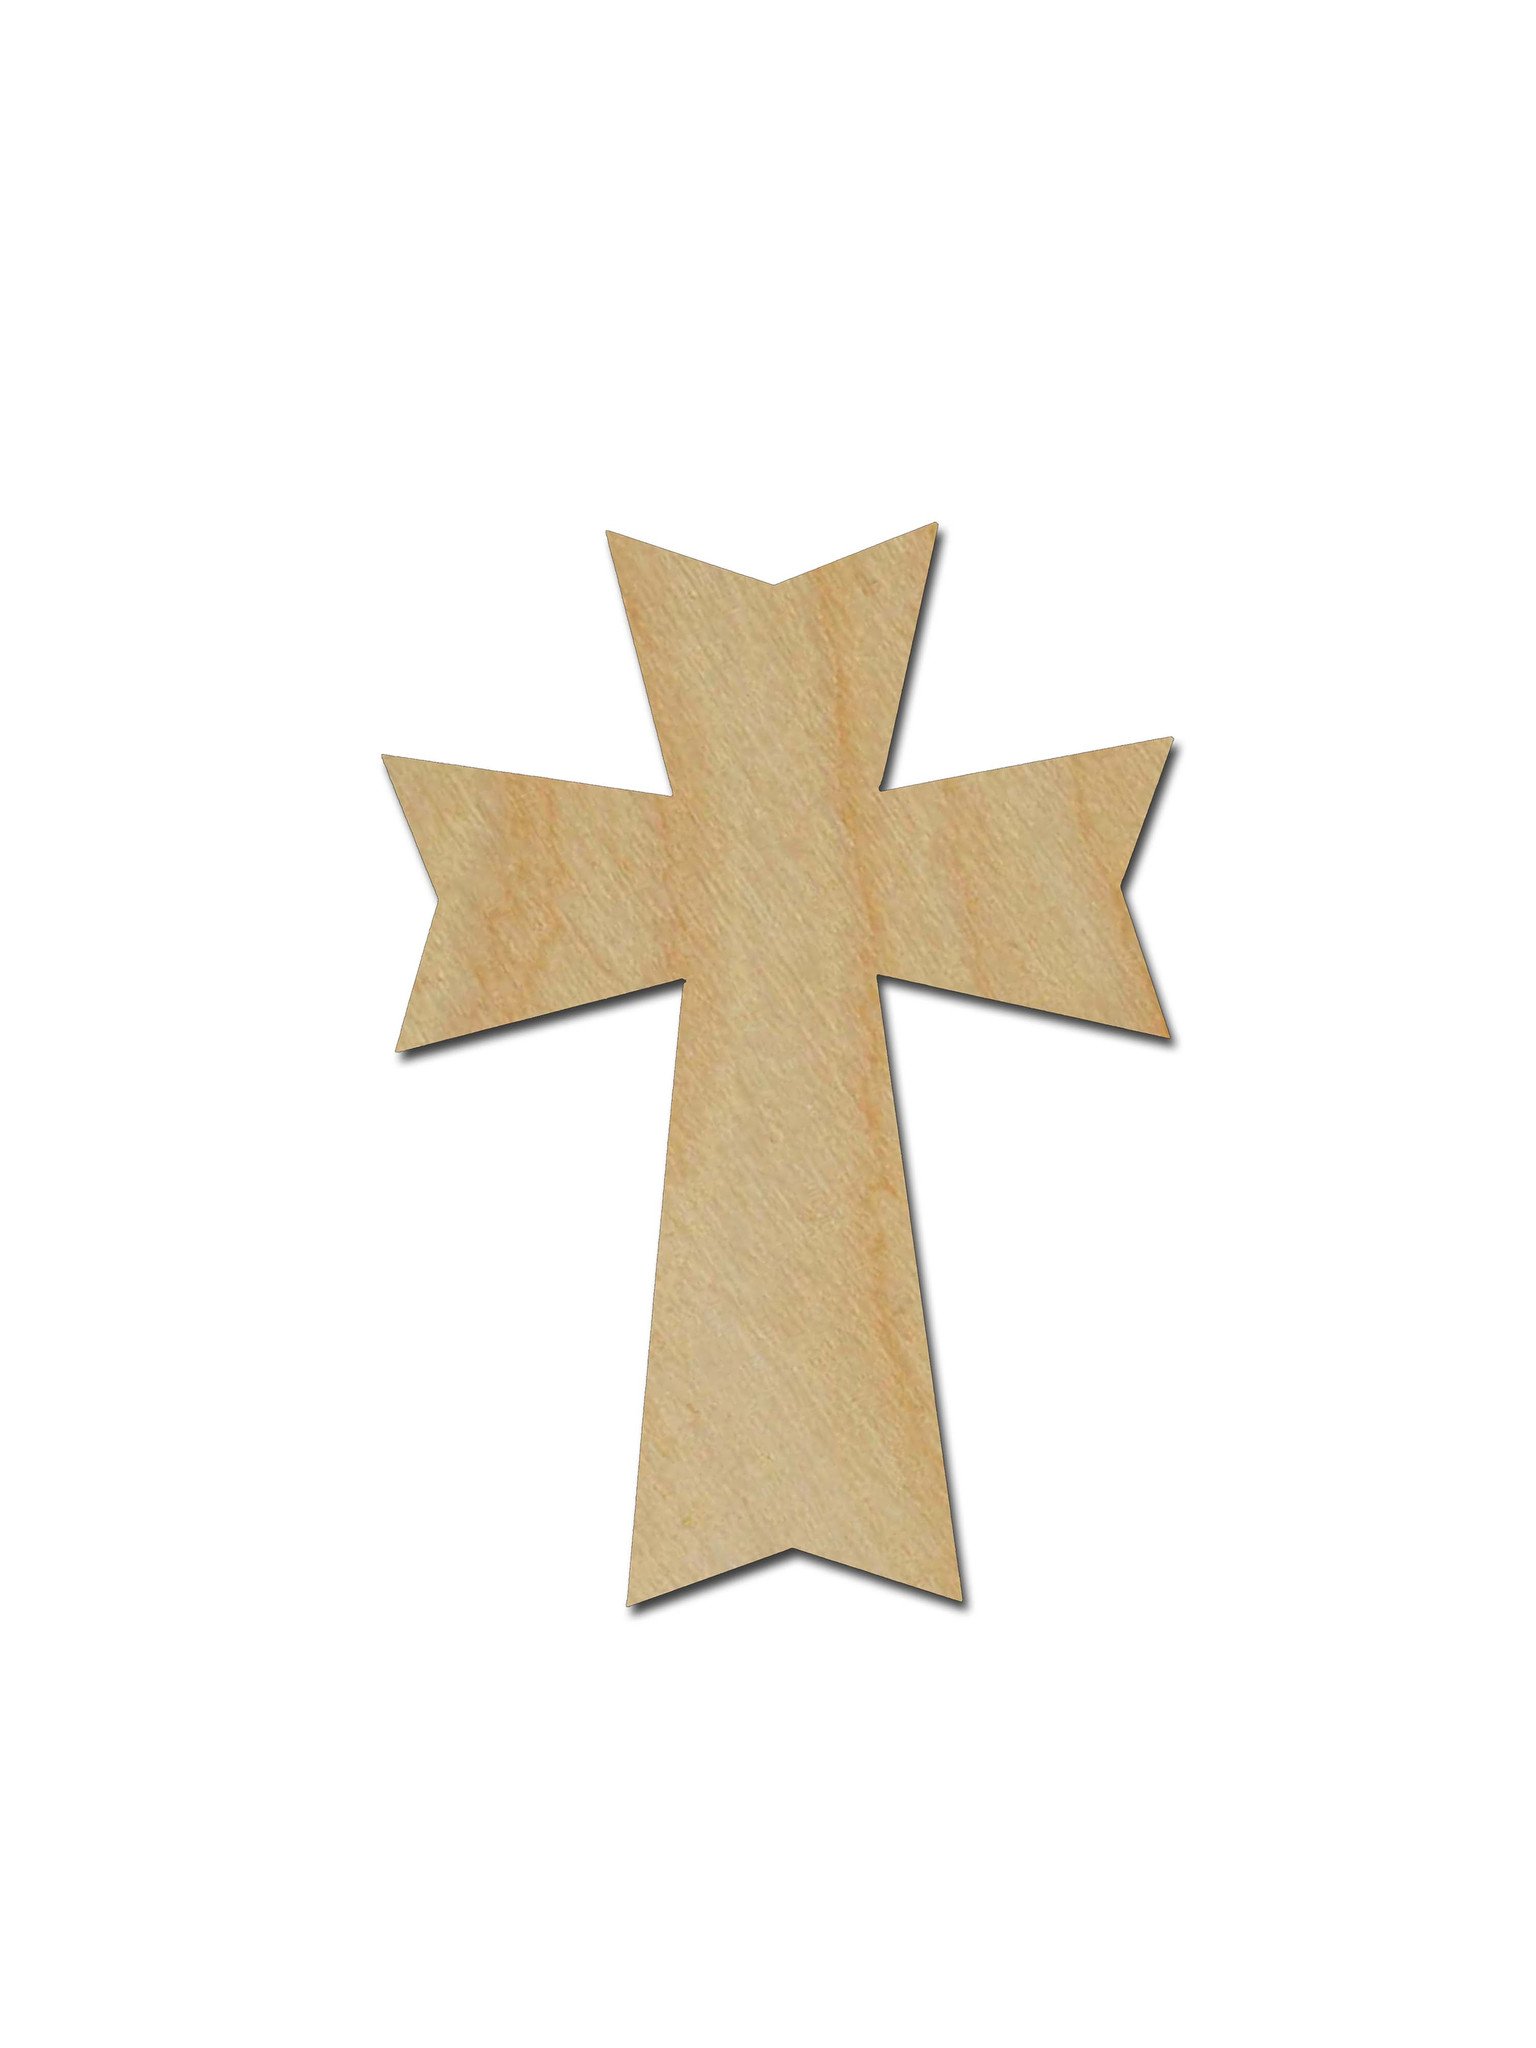 Unfinished Wood Cross Cutout MDF Craft Crosses Variety of Sizes ...